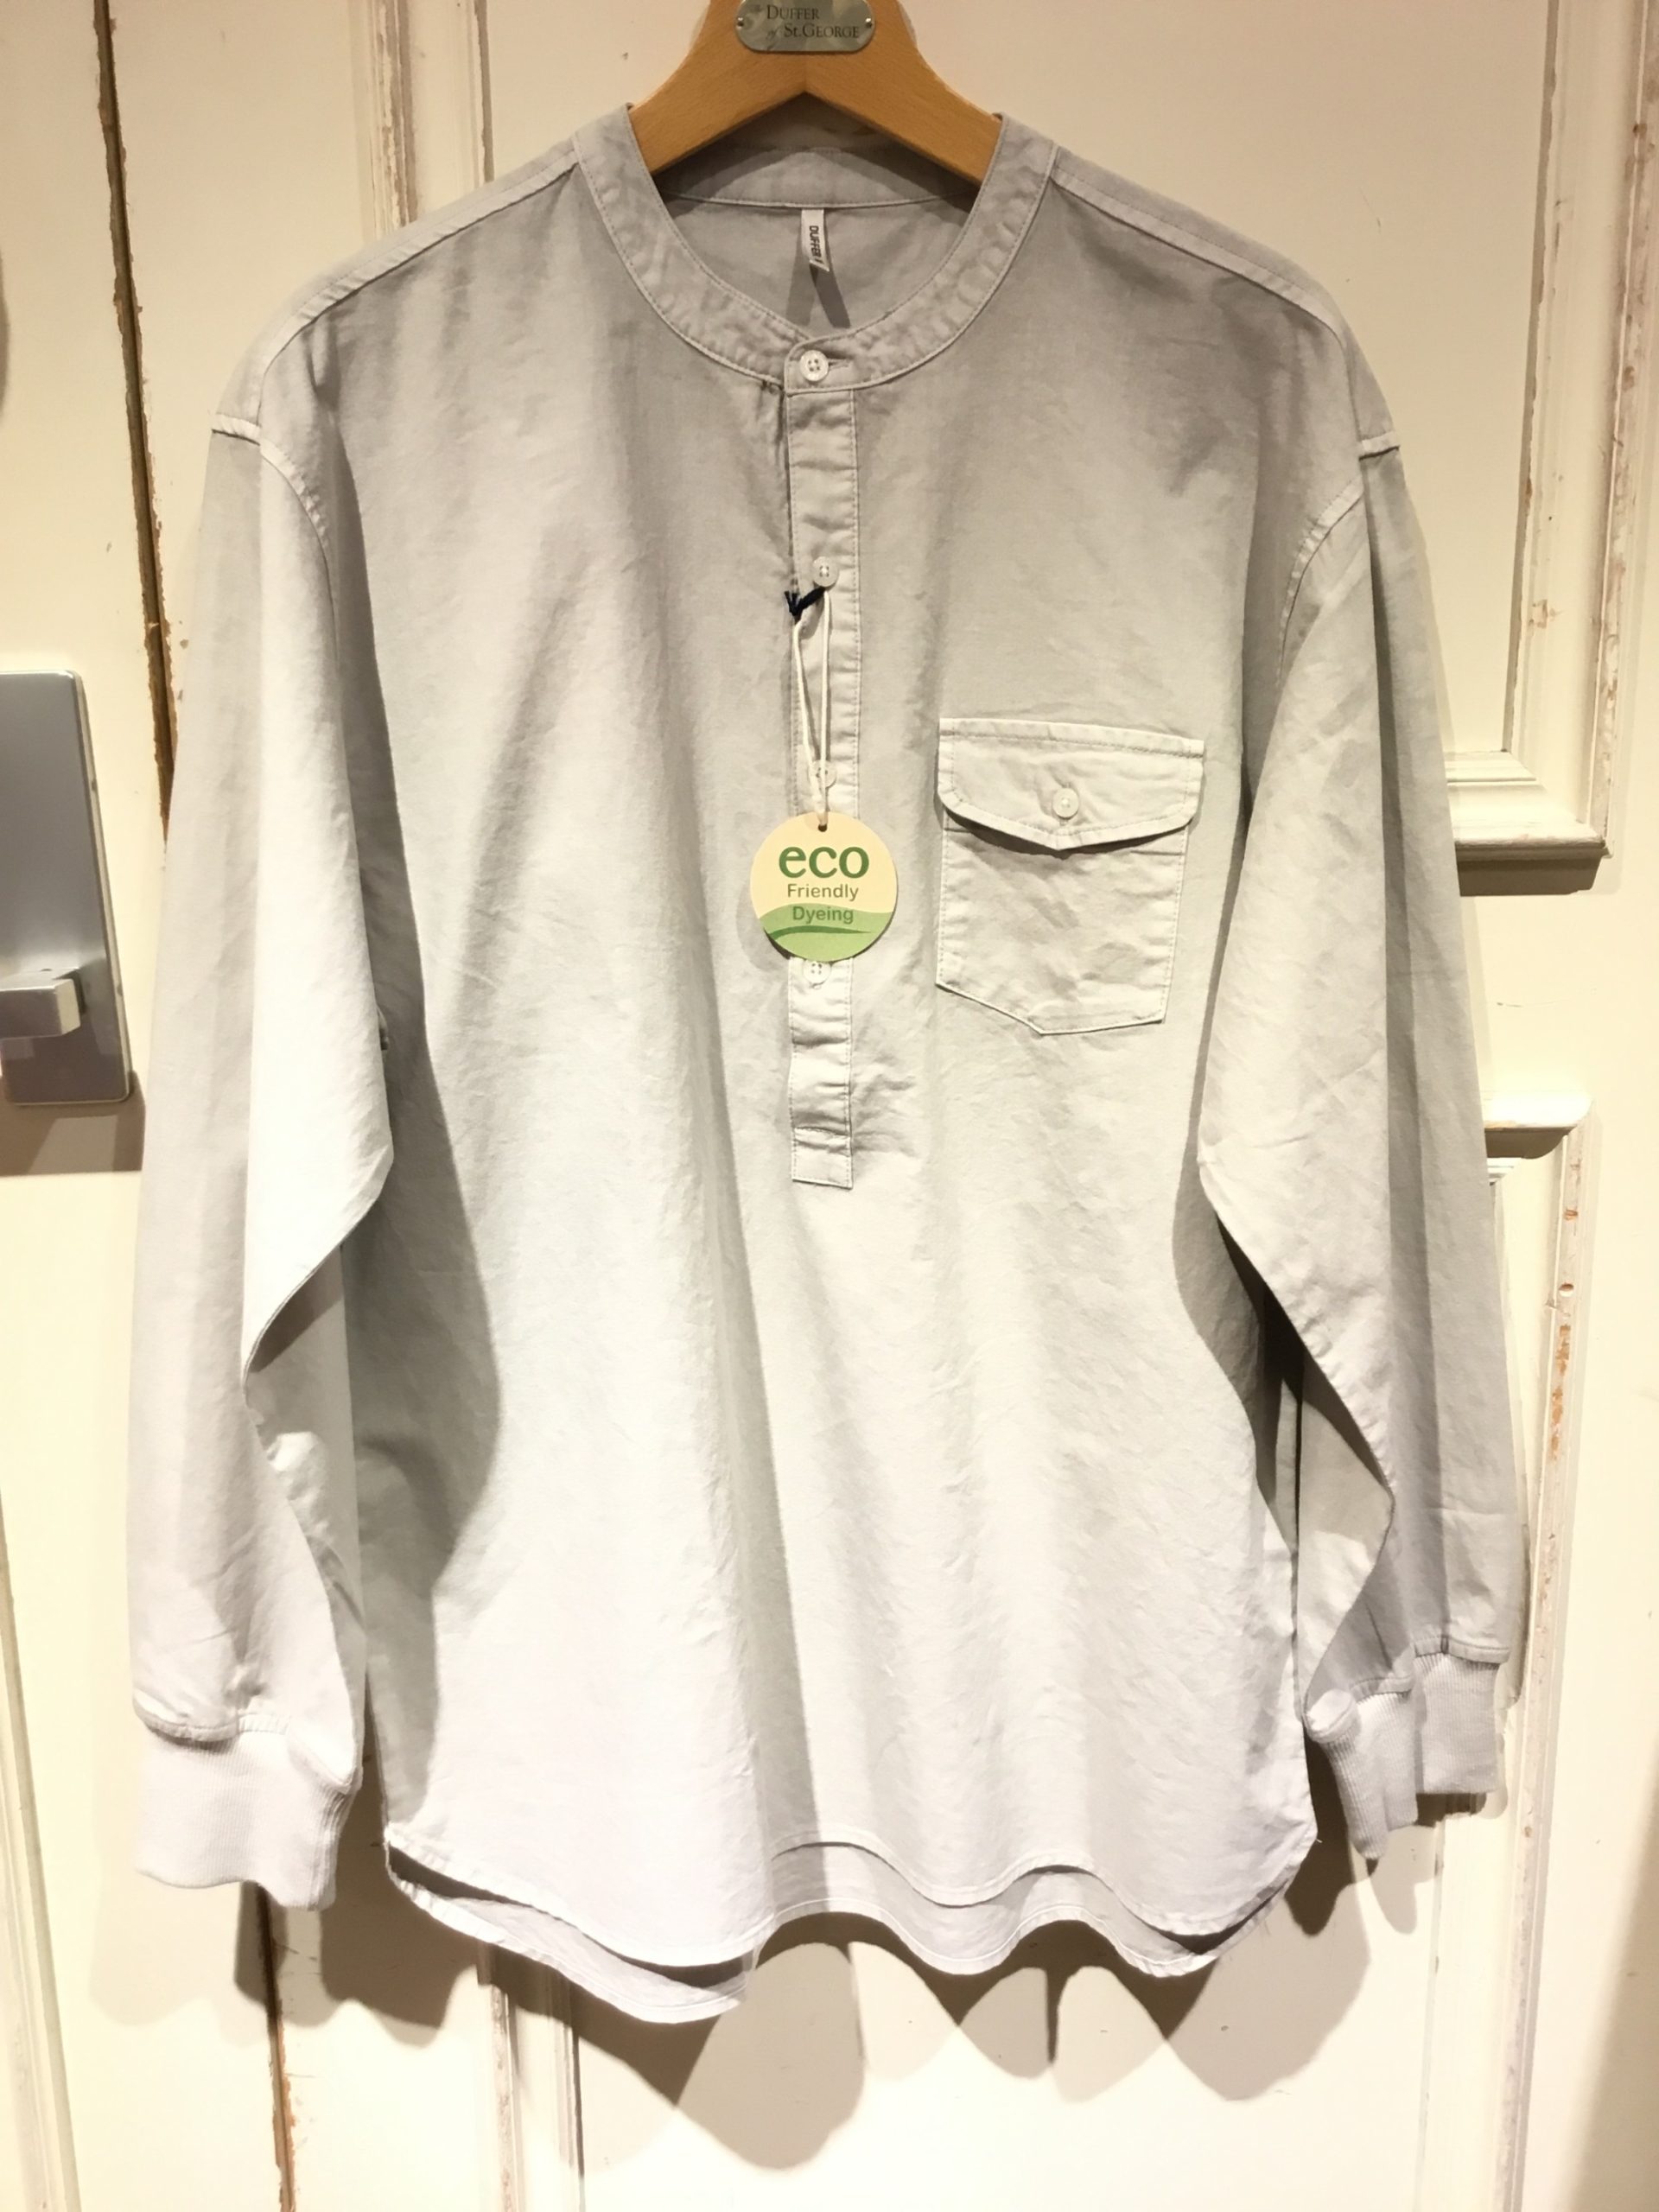 ECO FRIENDLY DYEING NO COLLAR RIBBED SHIRTS – The DUFFER of St